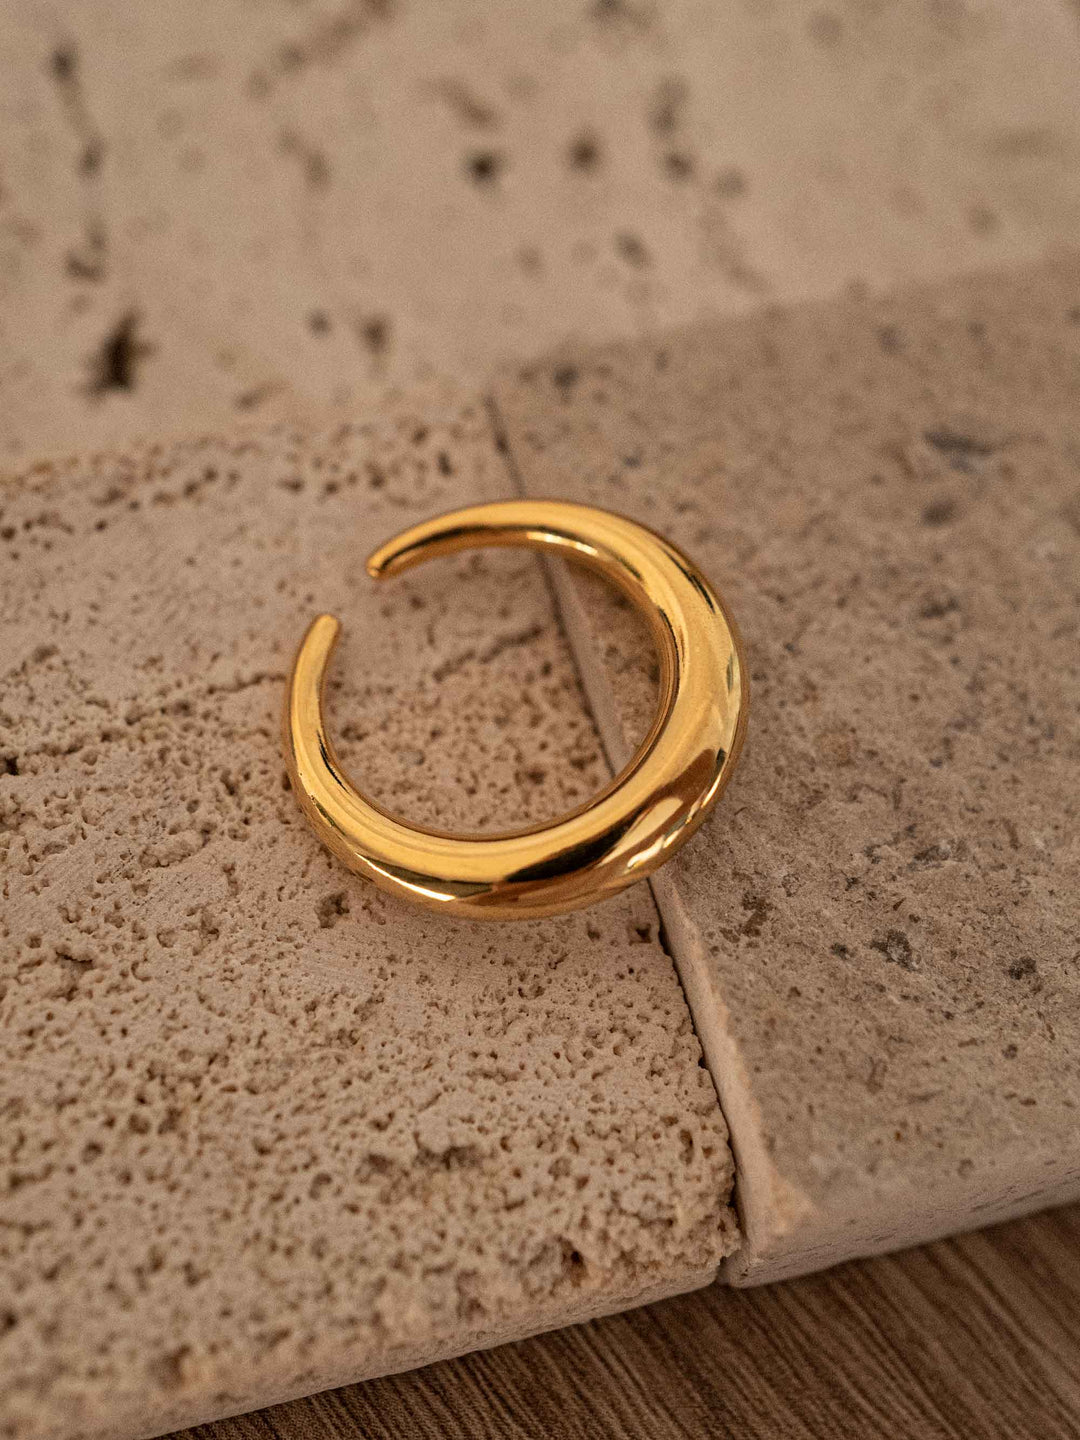 A polished gold ring.